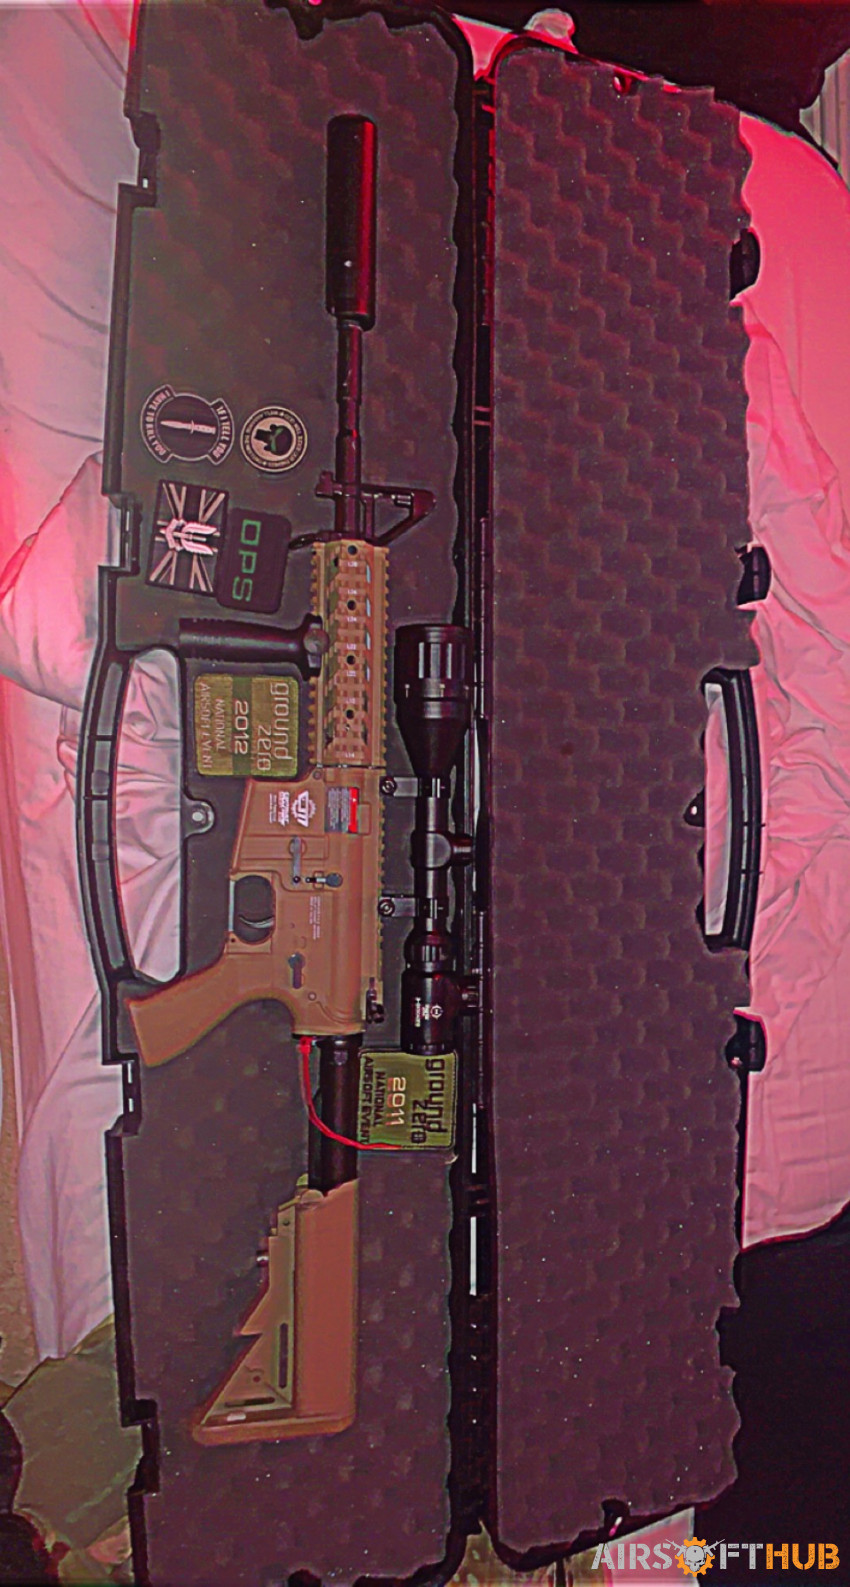 Fire hawk and M4 Raider - Used airsoft equipment